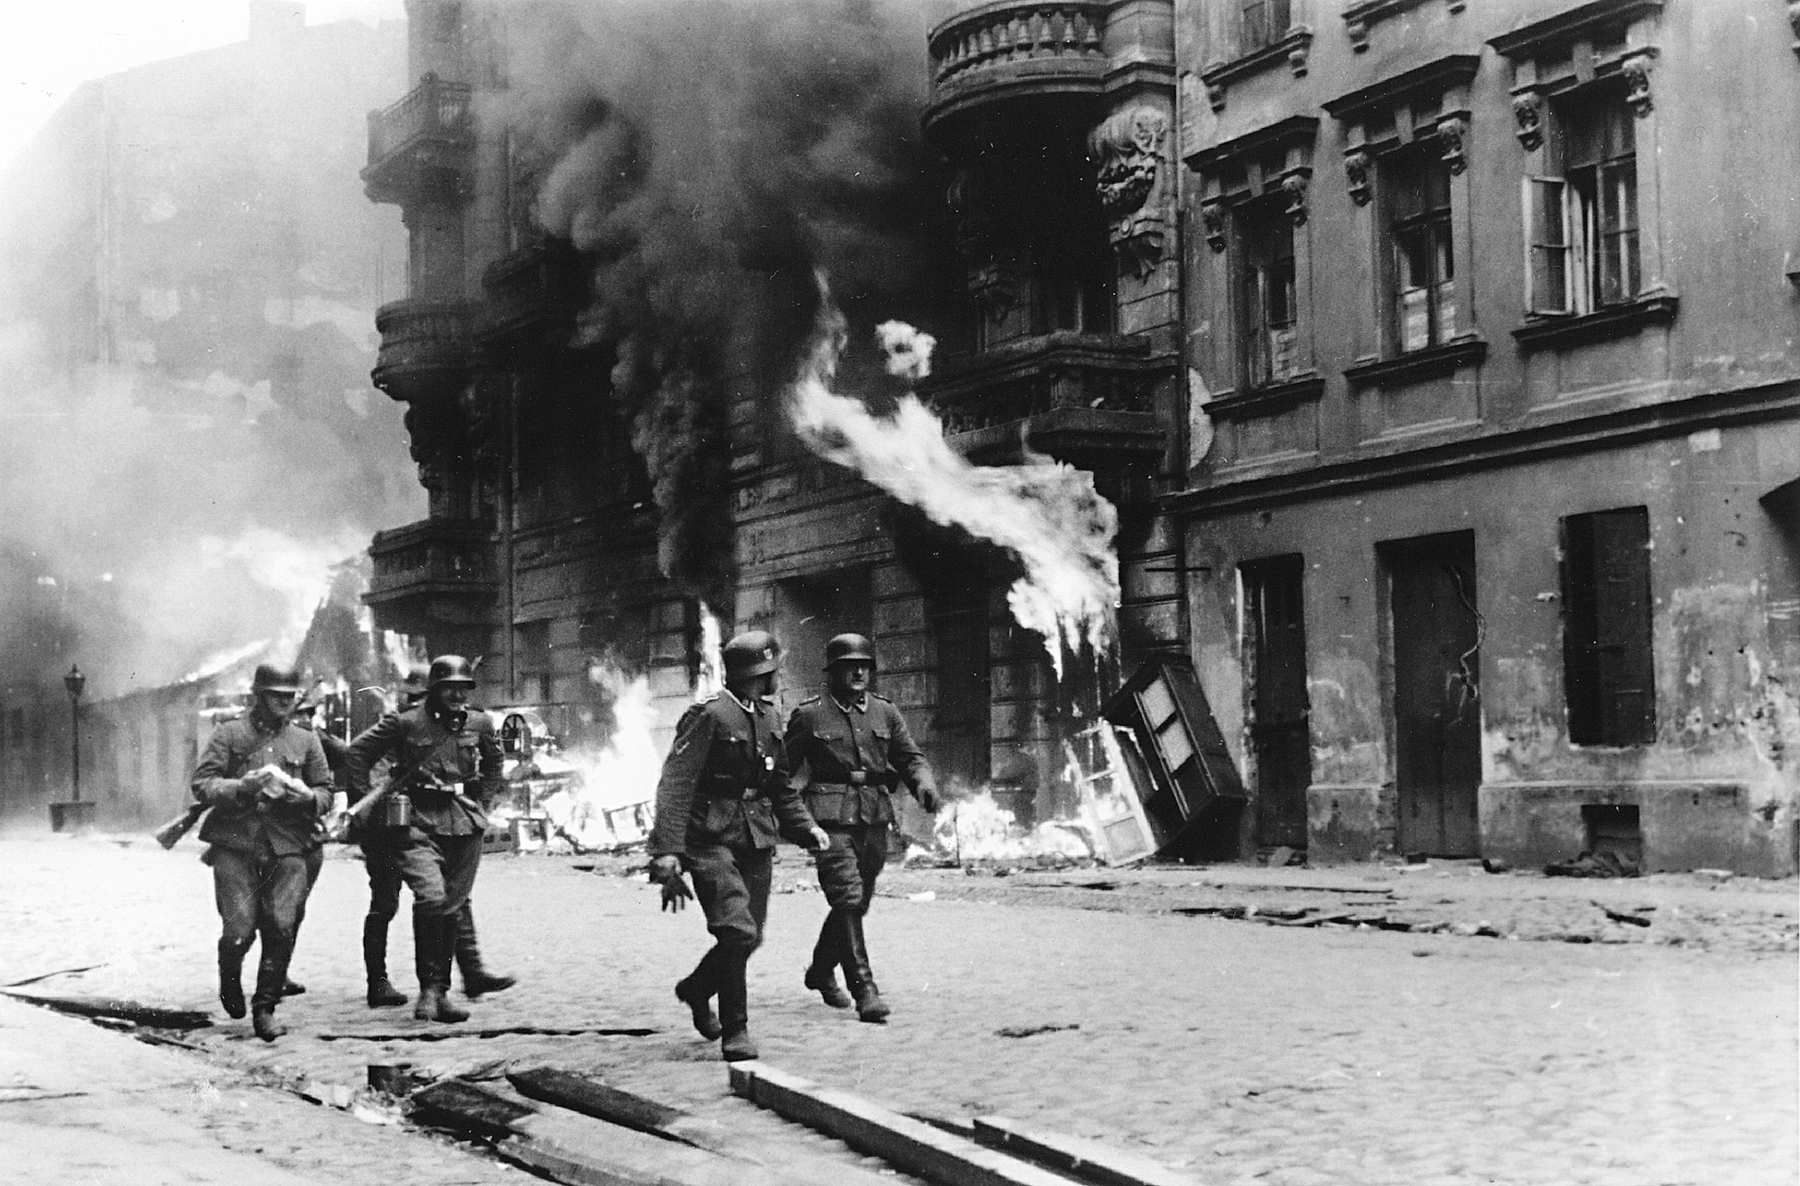 Warsaw Ghetto on Fire